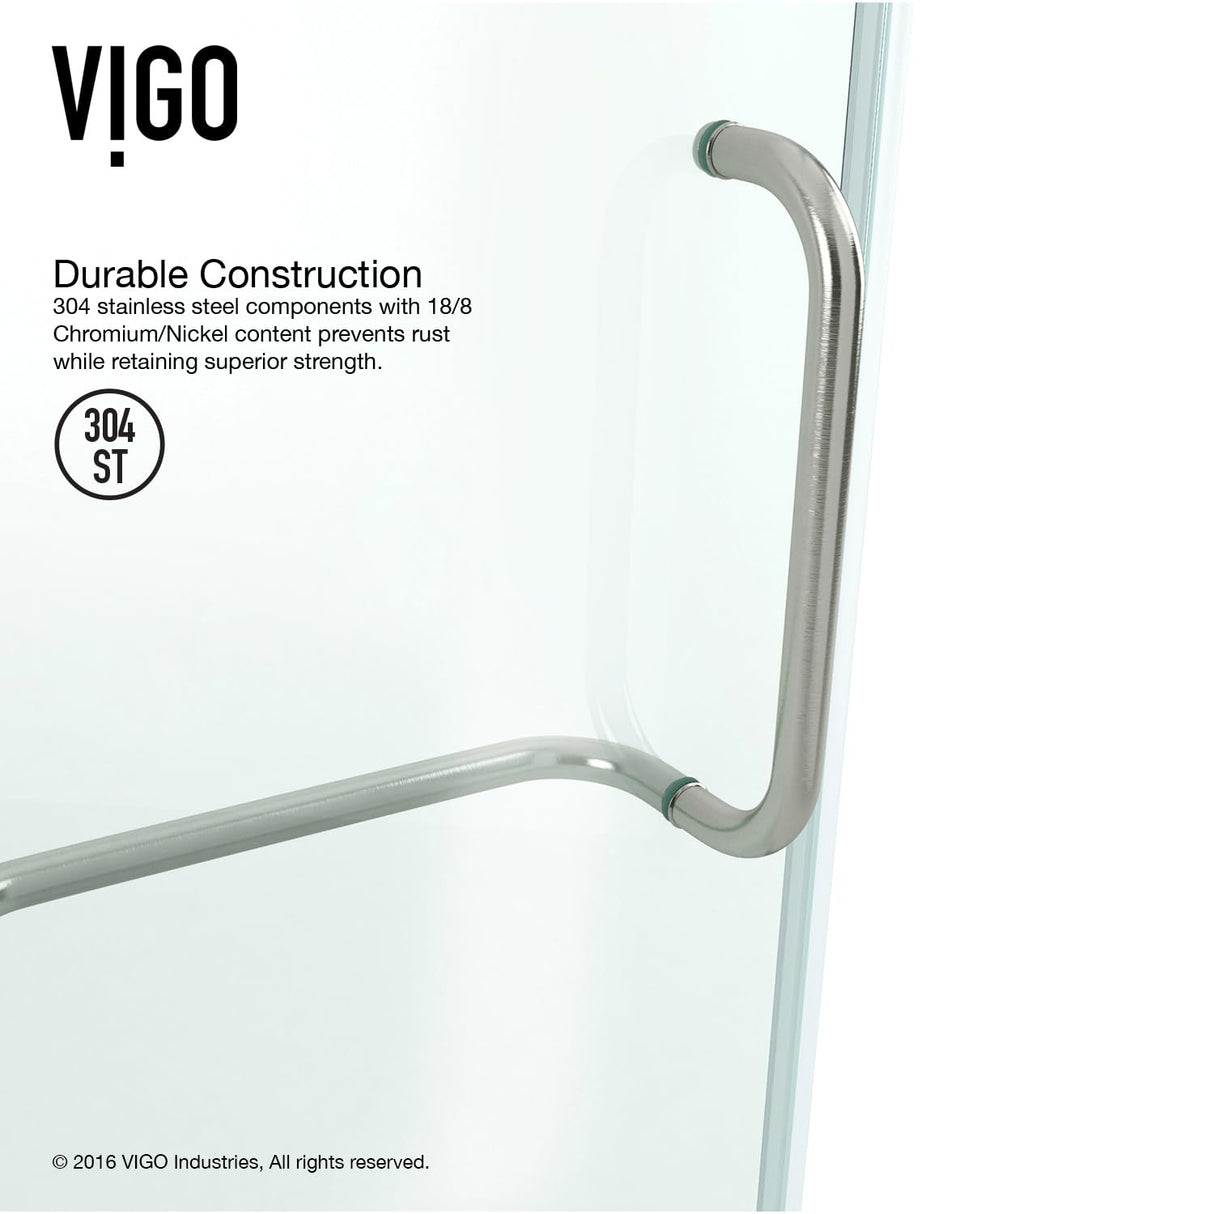 VIGO VG6062BNCL38W 38.13" -38.13"W -78.75"H Frameless Hinged Neo-angle Shower Enclosure with Clear 0.38" Tempered Glass Stainless Steel Hardware in Brushed Nickel Finish, Reversible Handle and Base